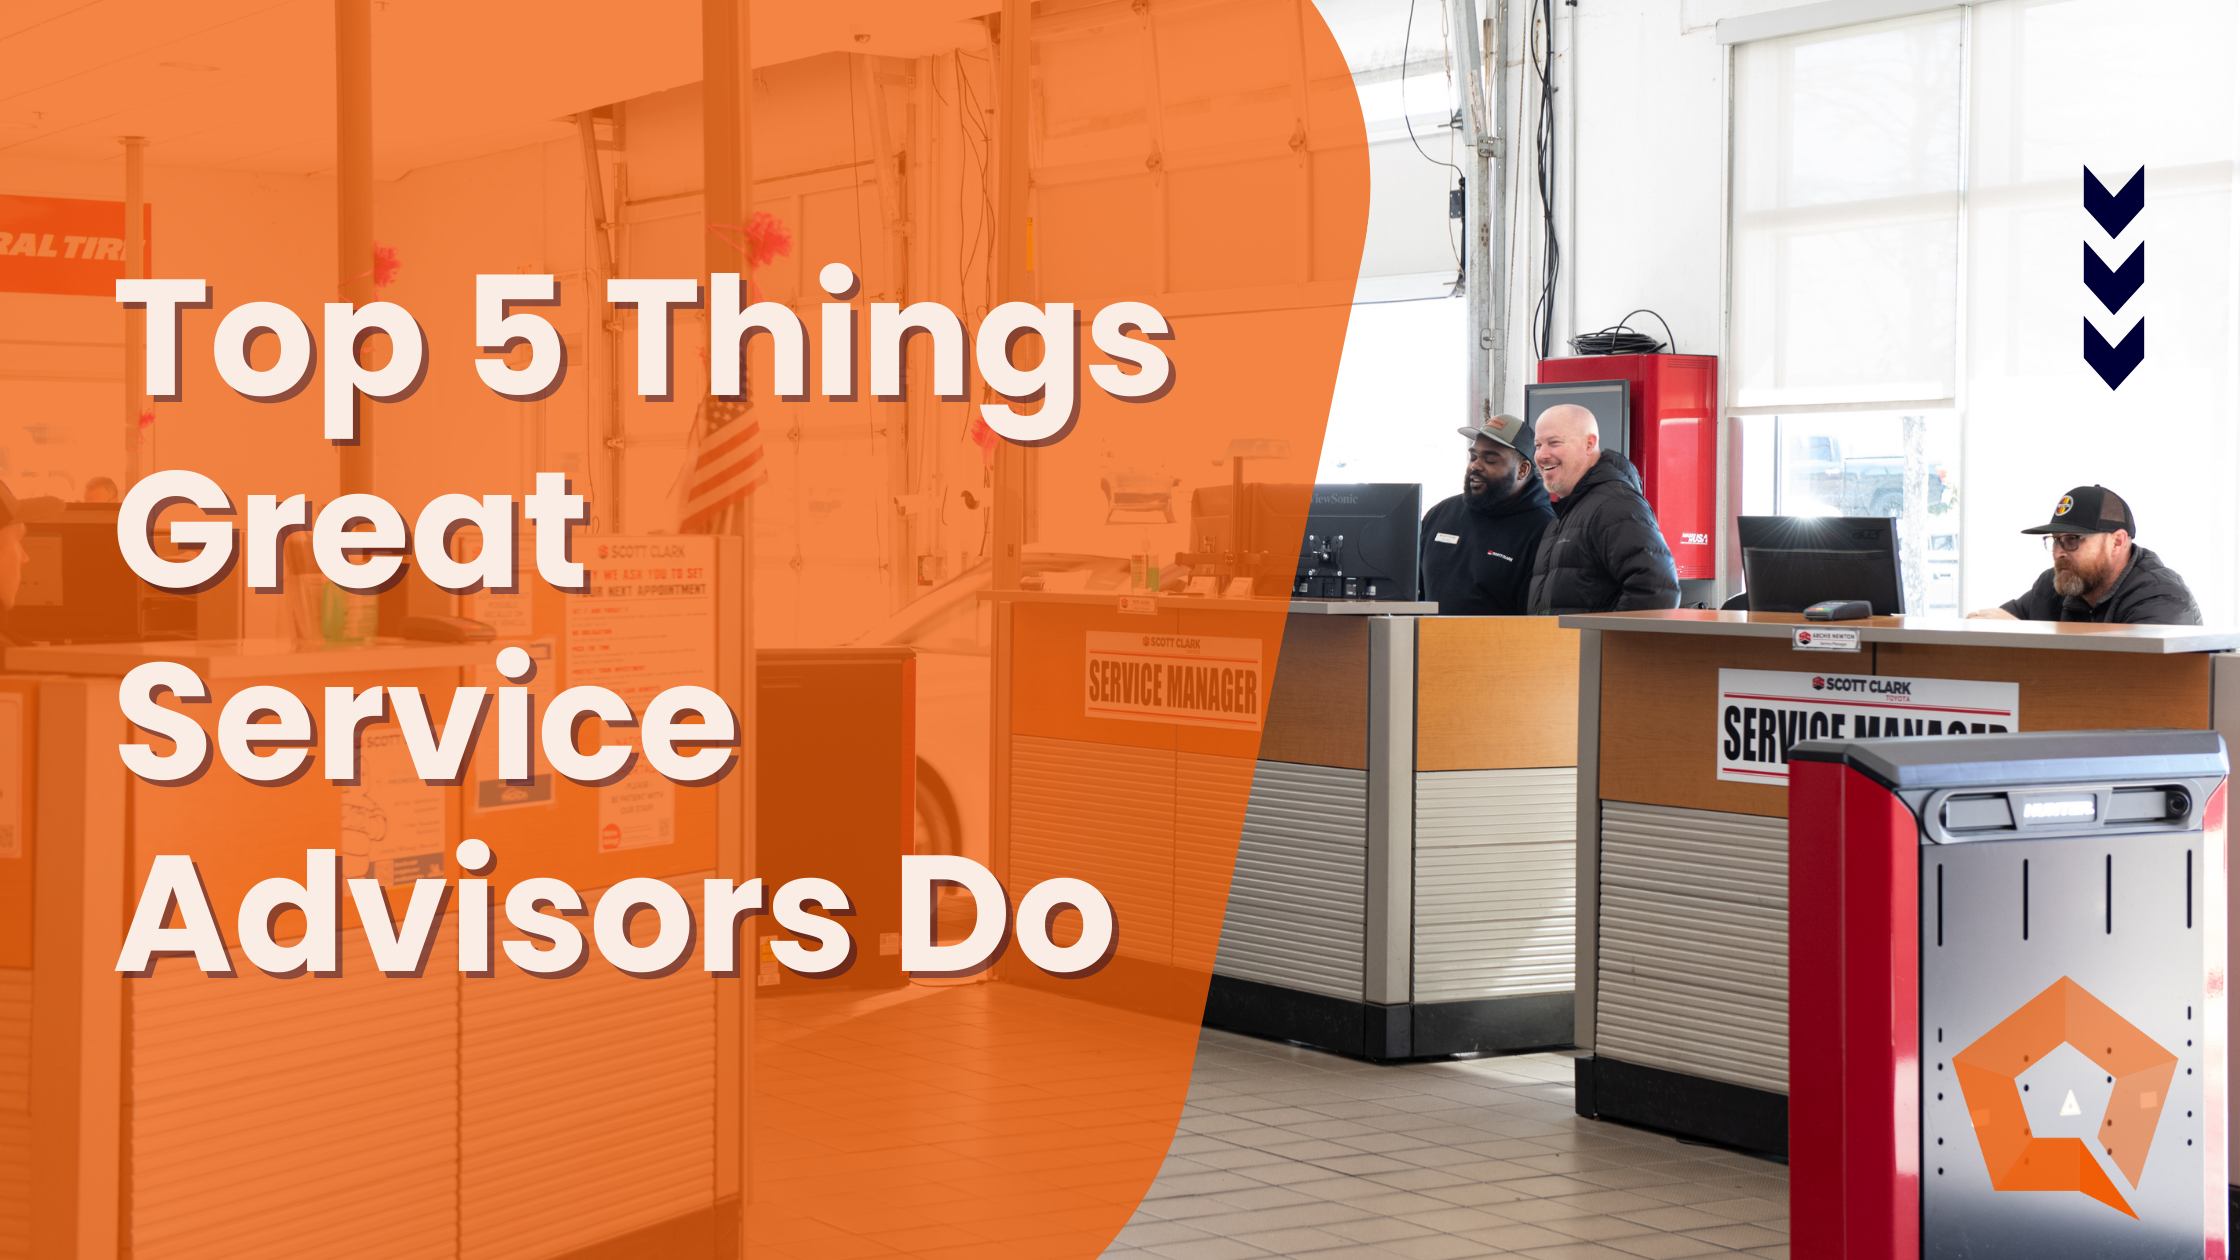 Top 5 Things Great Service Advisors Do